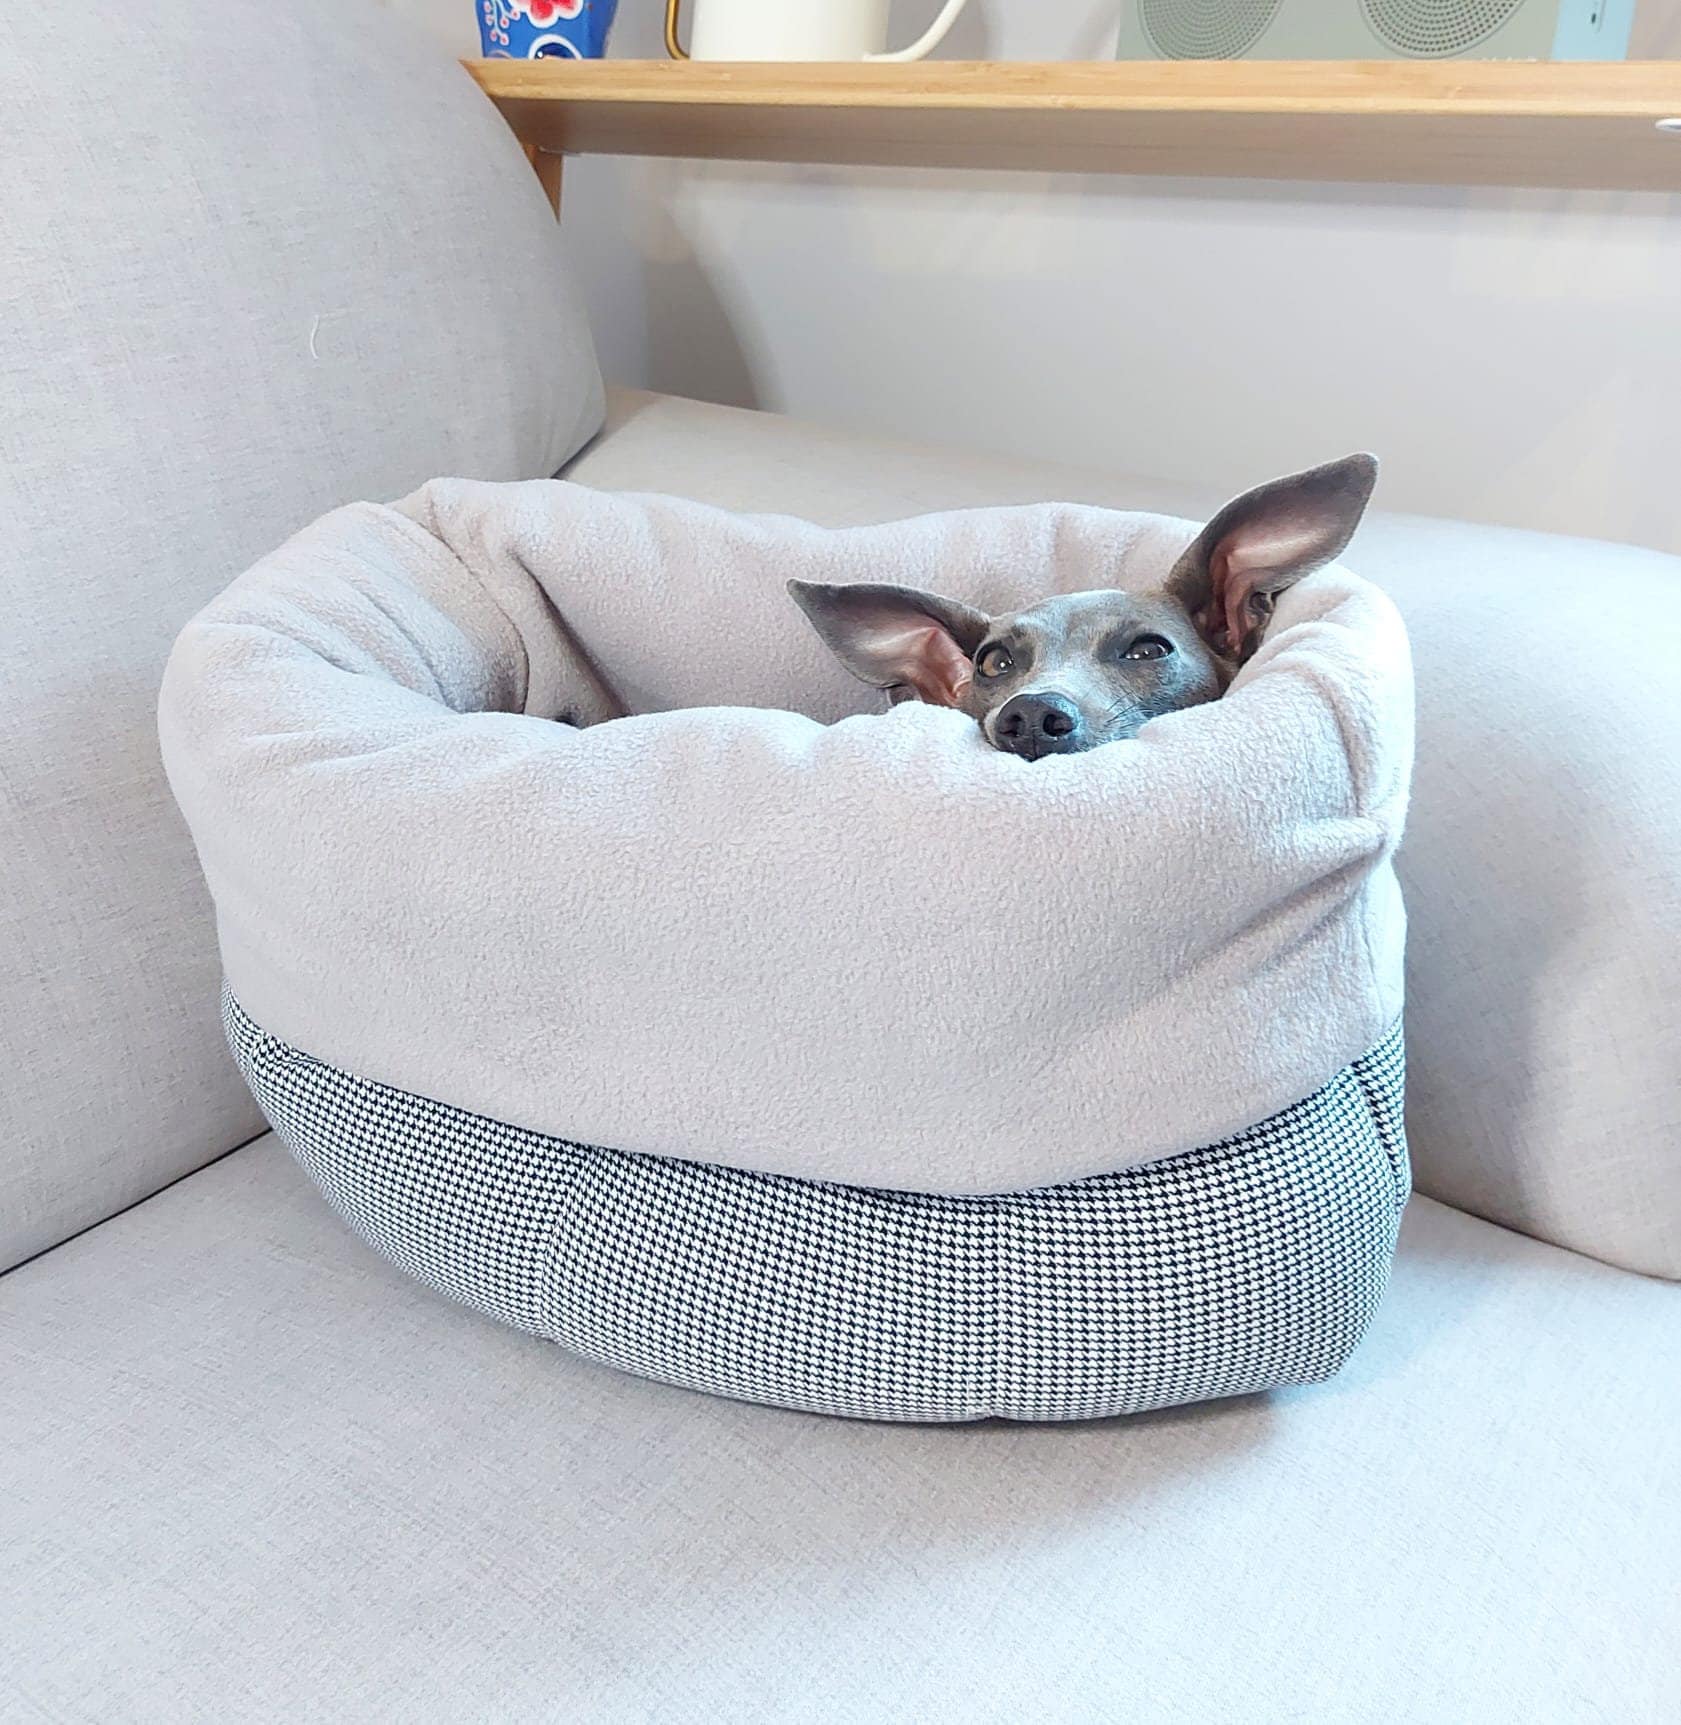 ONLY Cover Machine Washable Removable and Water- Resistant with Fish-Scale Pattern 29 x 20 Small Zippered Light Grey Made4Pets Pet Dog Bed Orthopedic Dog Cushion Cover 